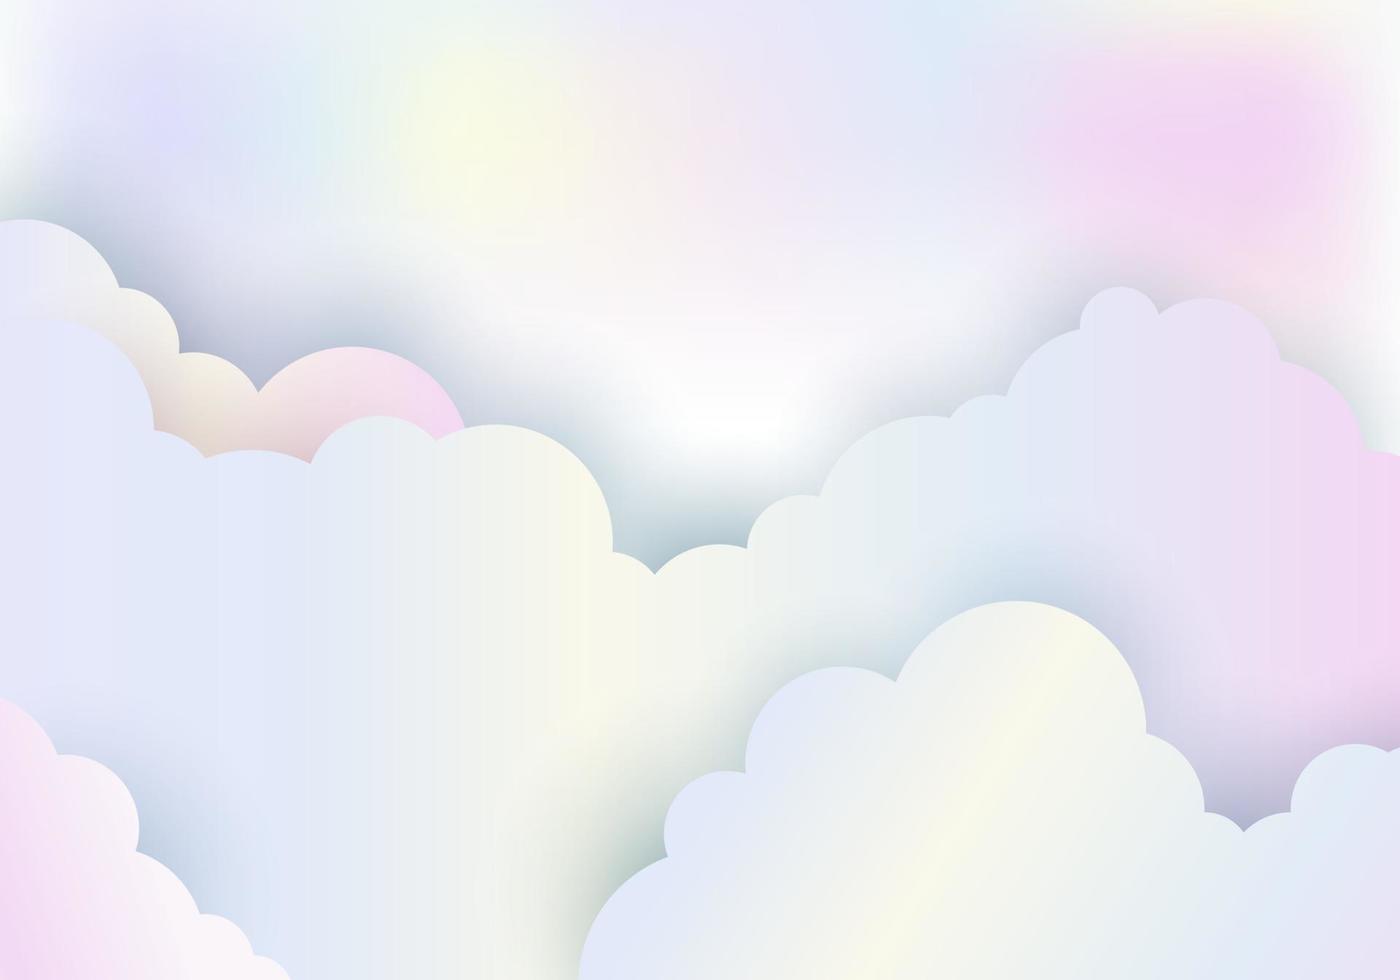 Cloudy rainbow color pastel sky background paper cut style vector